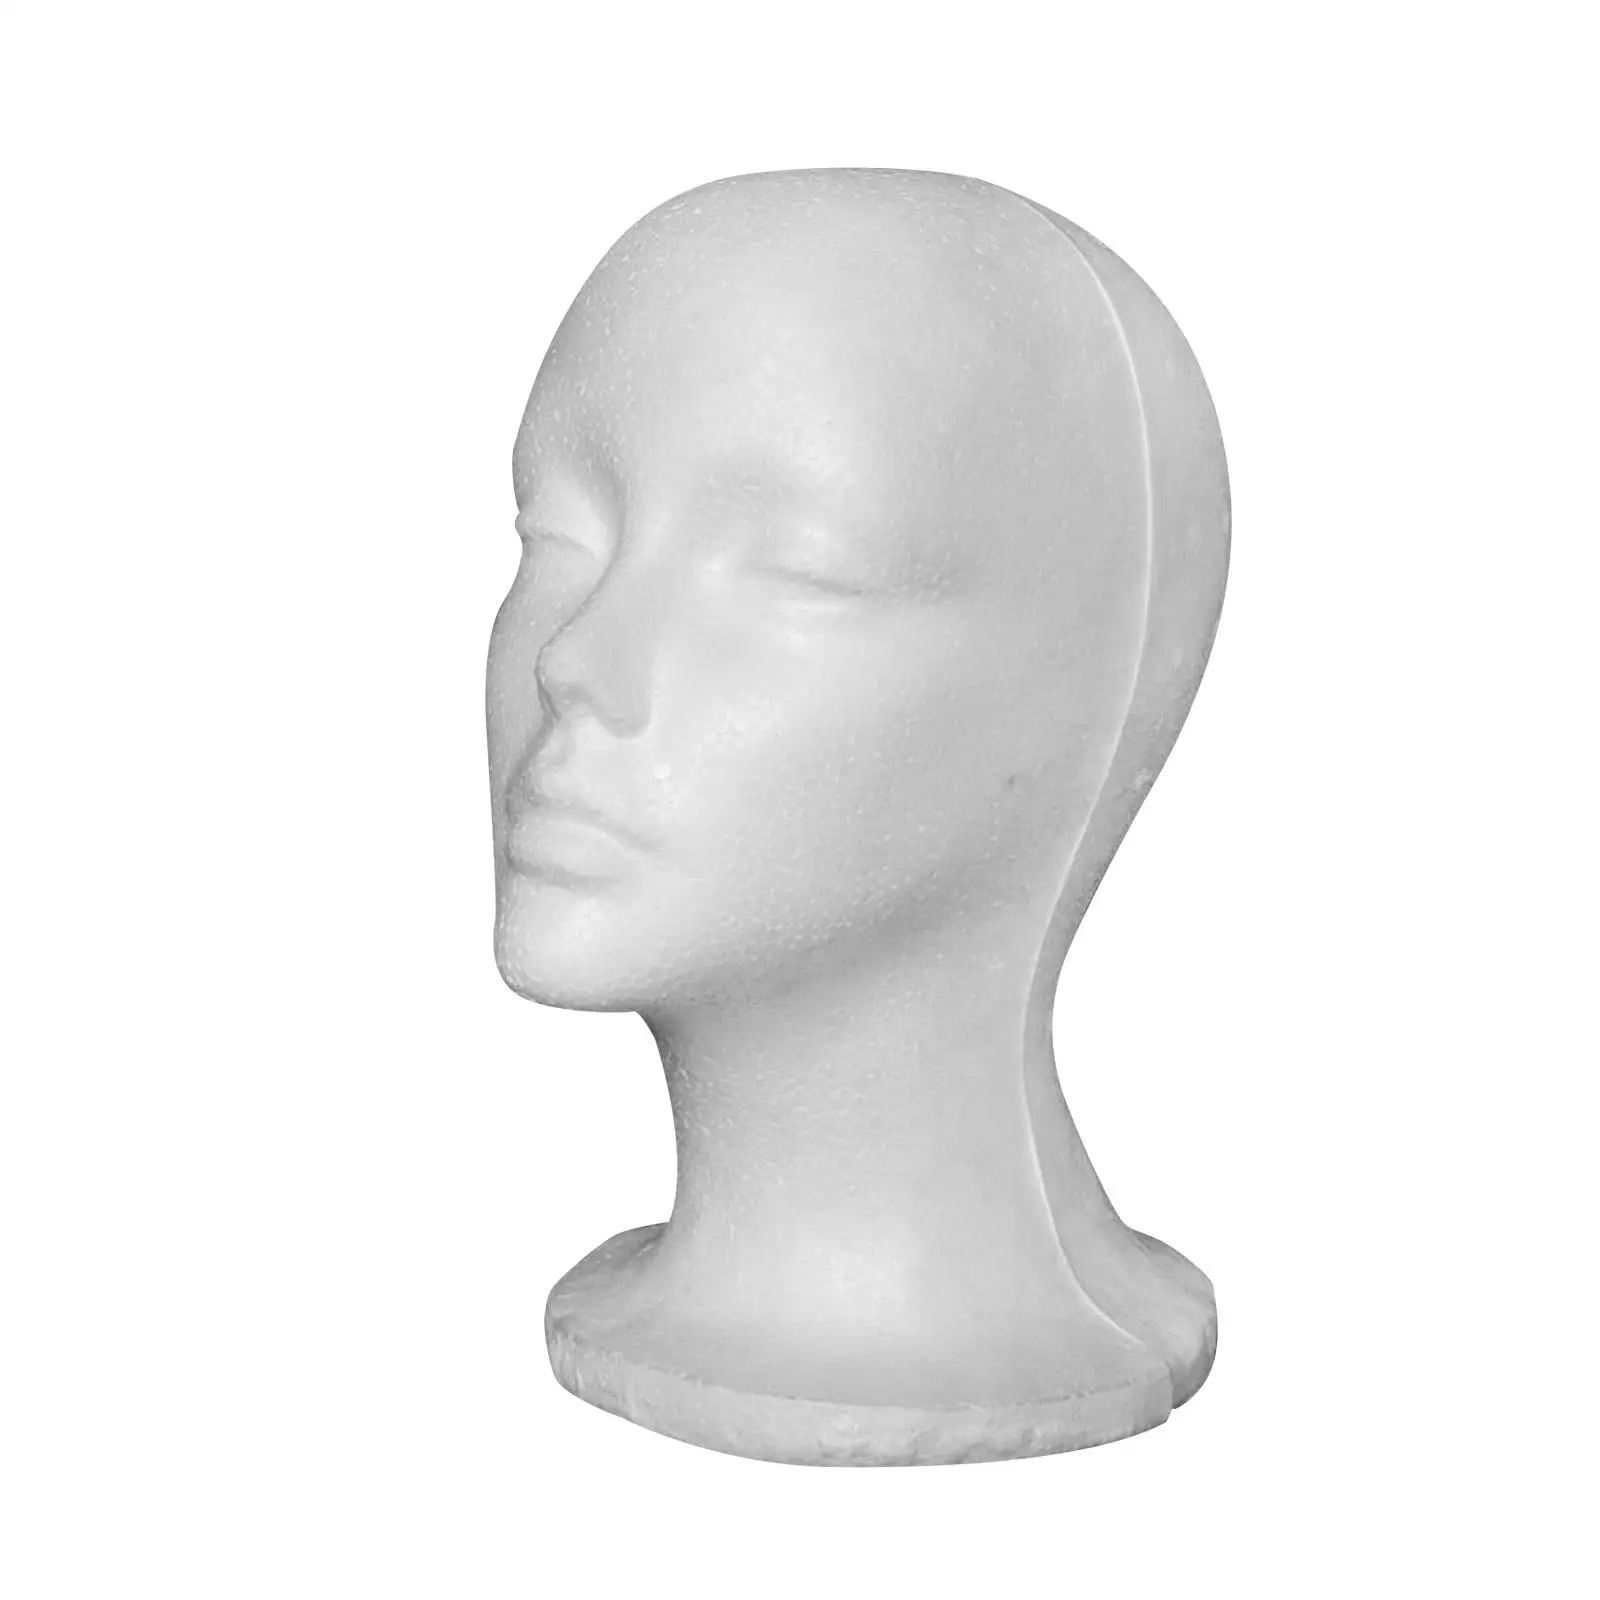 Foam Mannequin Head Multi Functional Hair Hat Display Holder Stand Hairpiece Stand Foam Mannequin Head Display for Props Salon